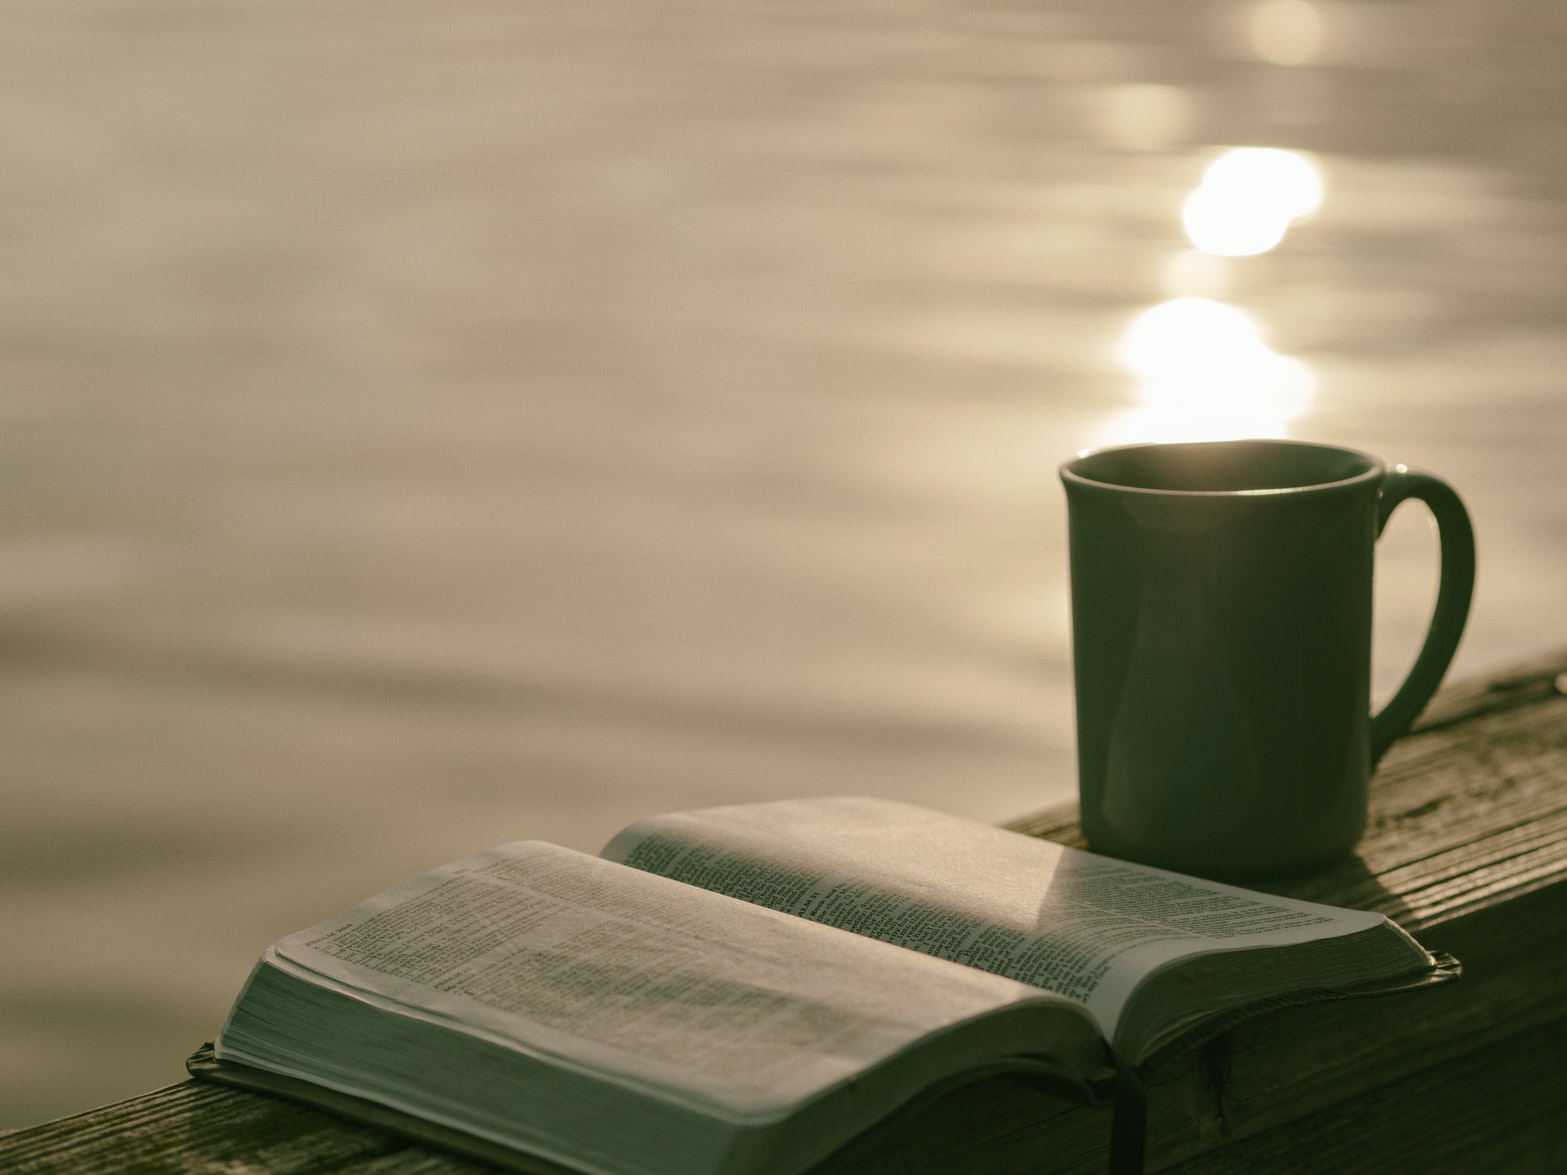 A cup and an open book sit on a flat outside surface.